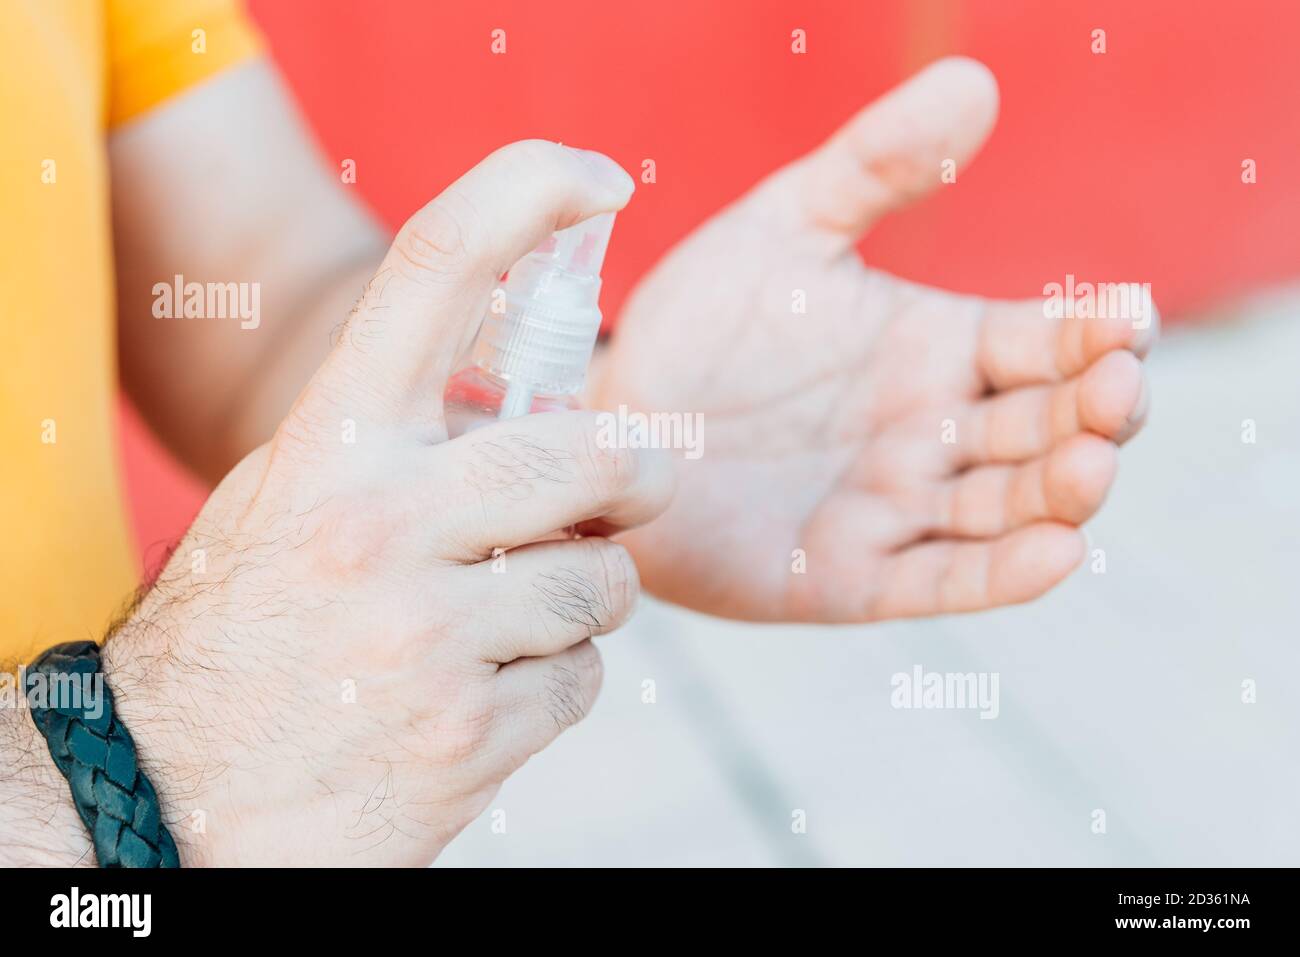 Hand of man that applying alcohol. Health care concept. Stock Photo